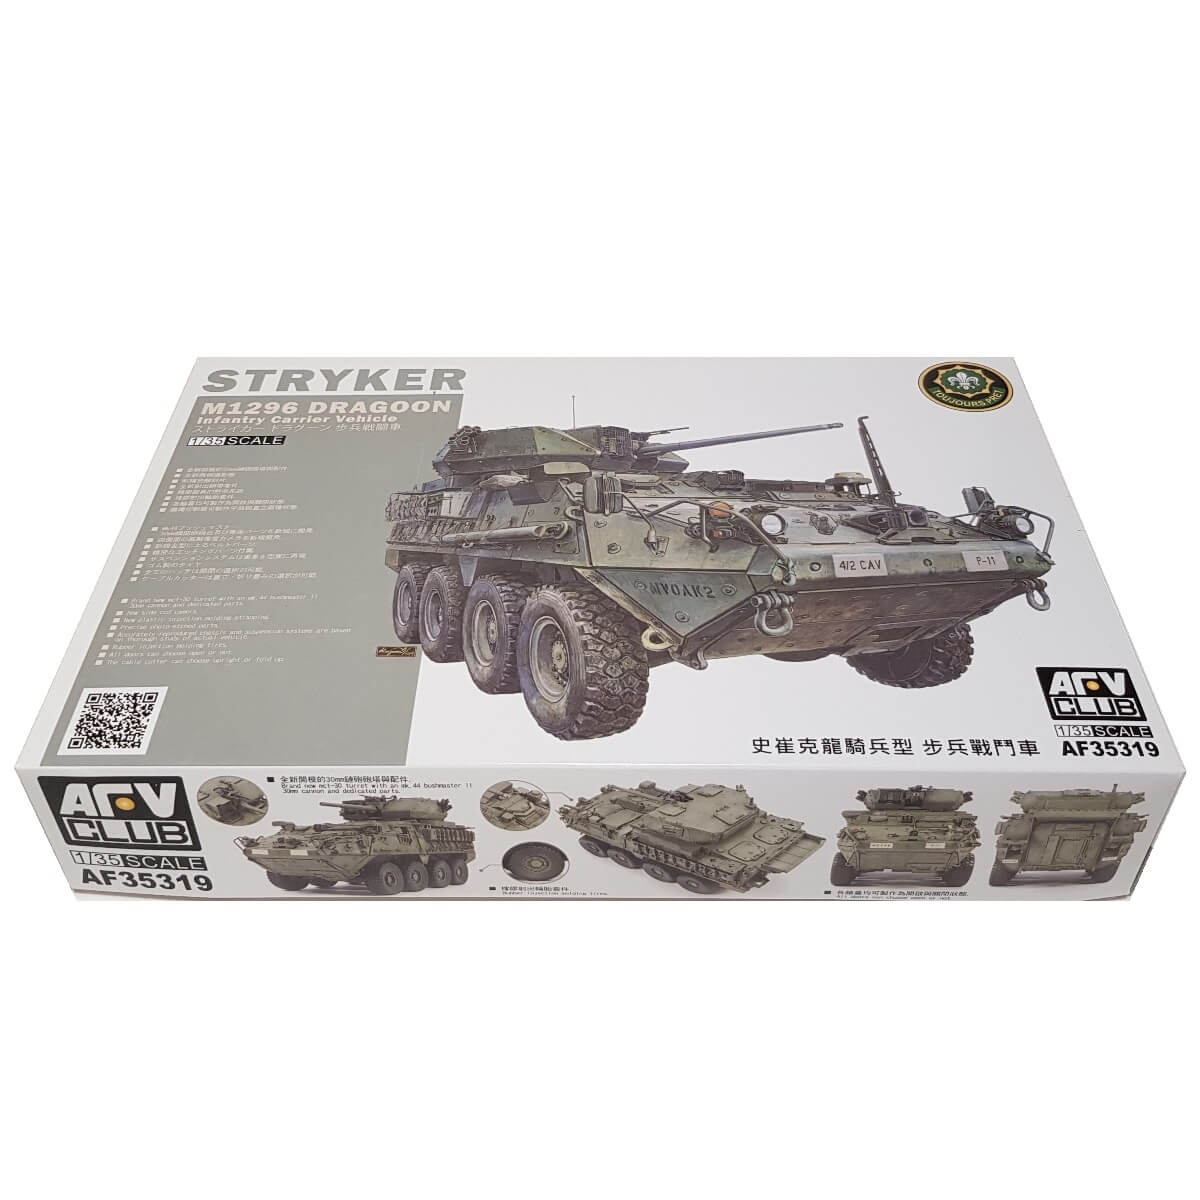 1:35 Stryker M1296 Dragoon Infantry Carrier Vehicle - AFV CLUB